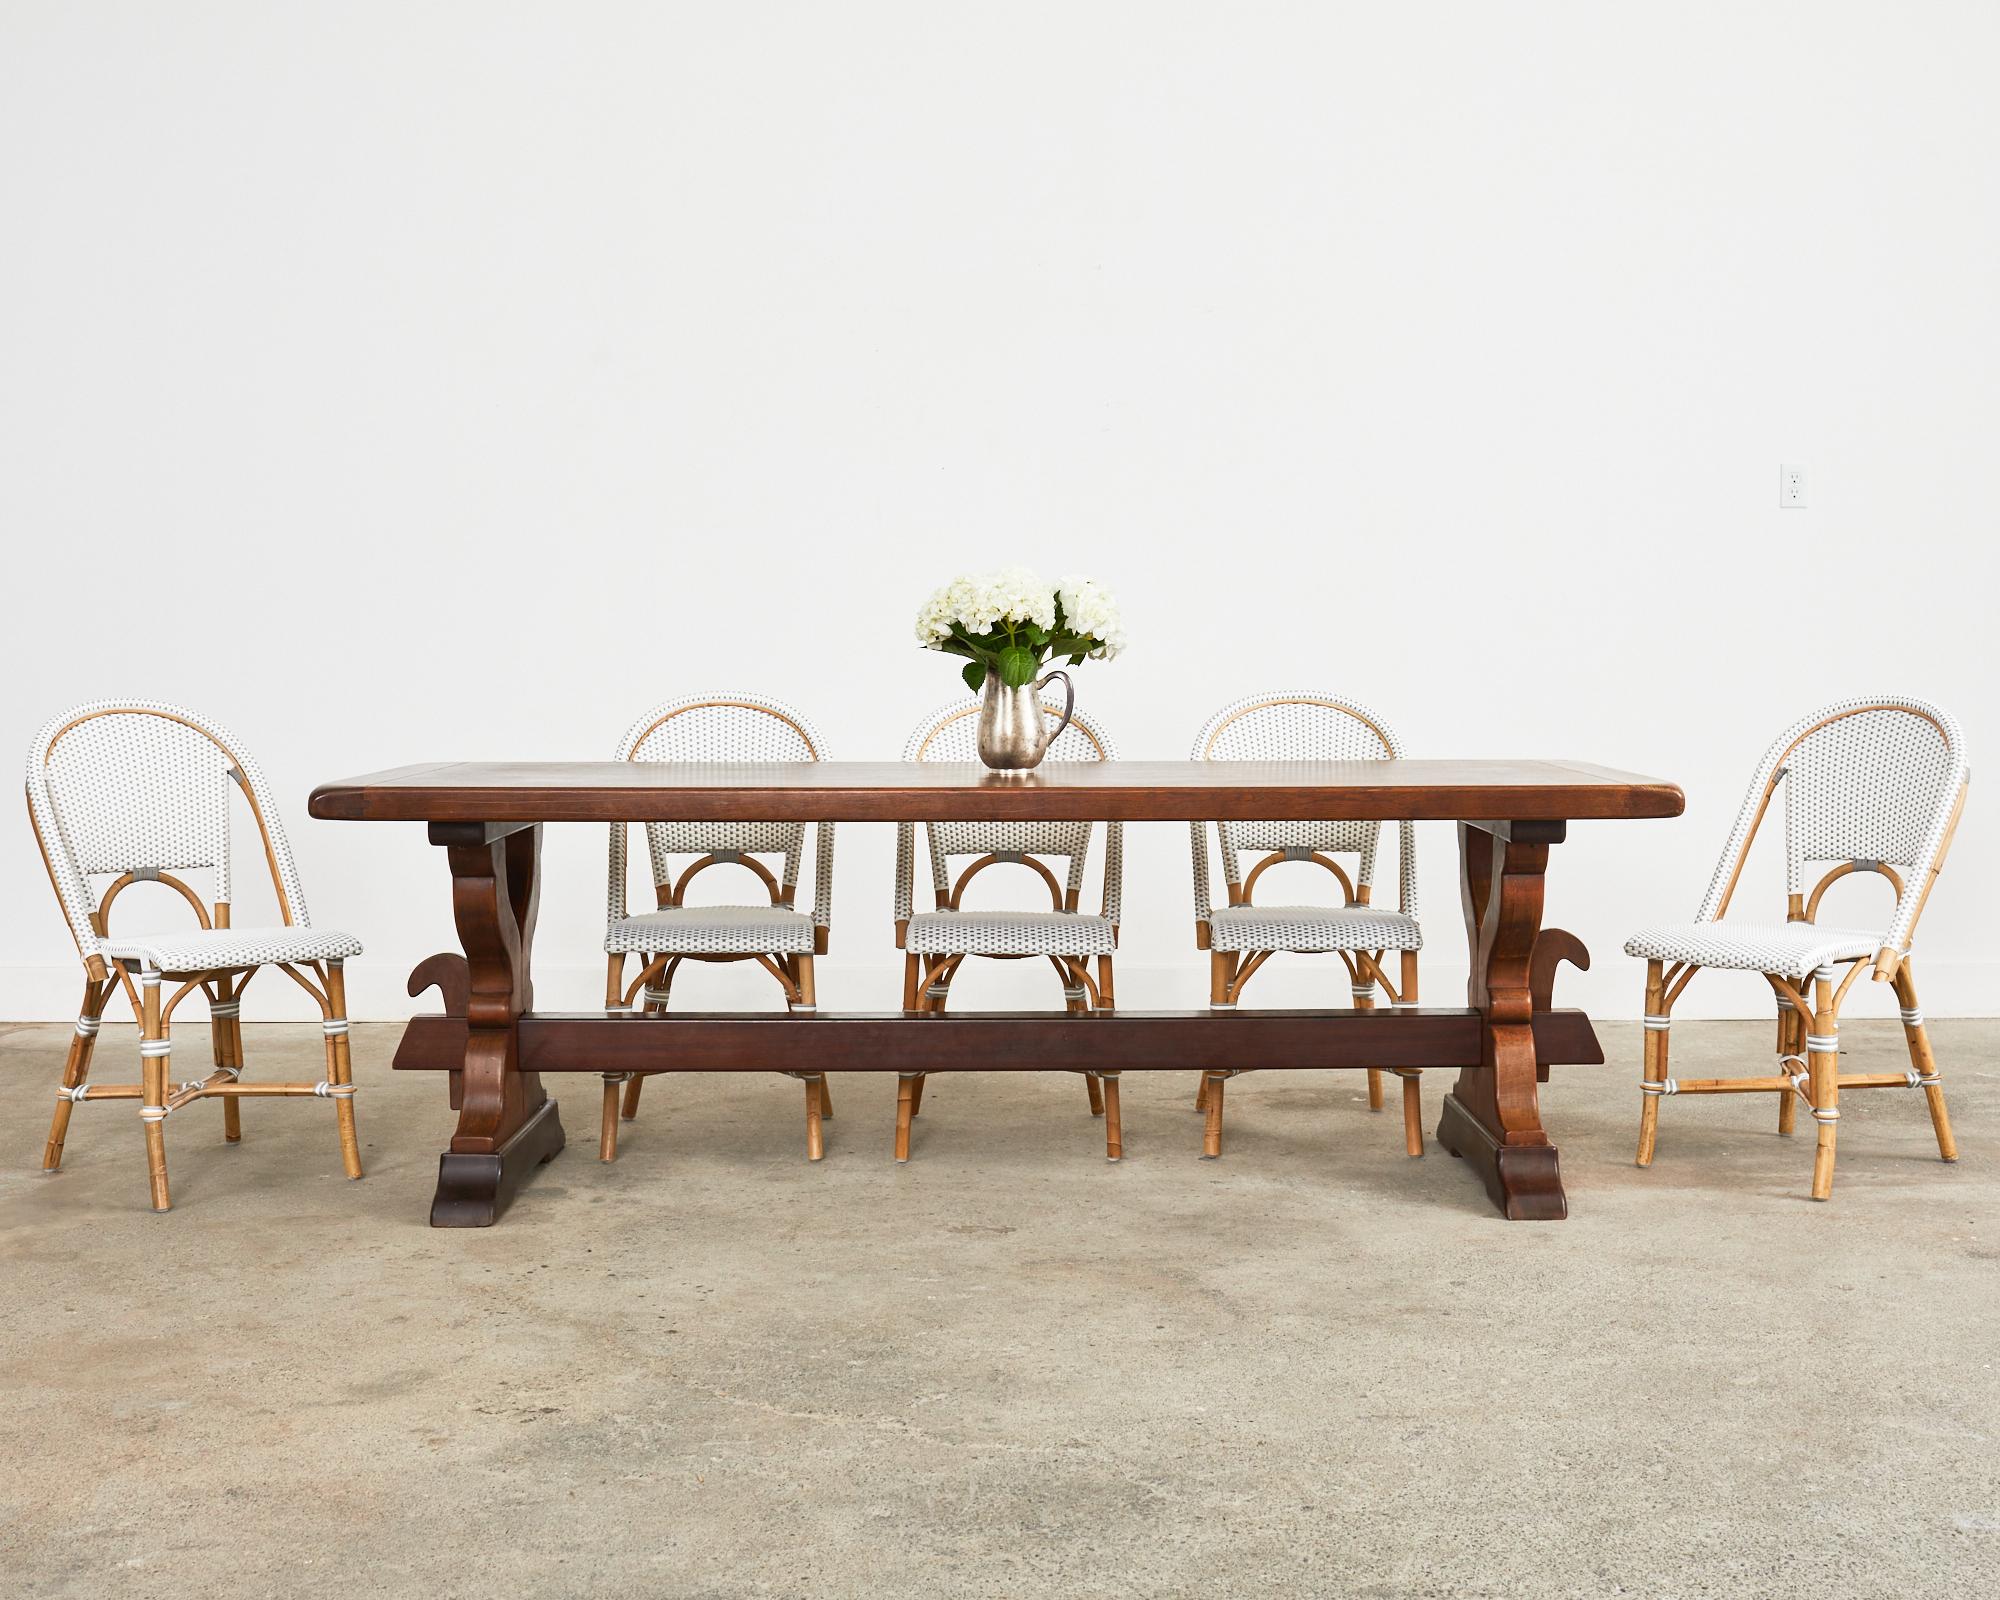 Gorgeous country French provincial oak farmhouse dining table or harvest table crafted from solid oak. The plank top is over 2 inches thick with breadboard ends and supported by a trestle base. The base has gracefully curved legs that end with large